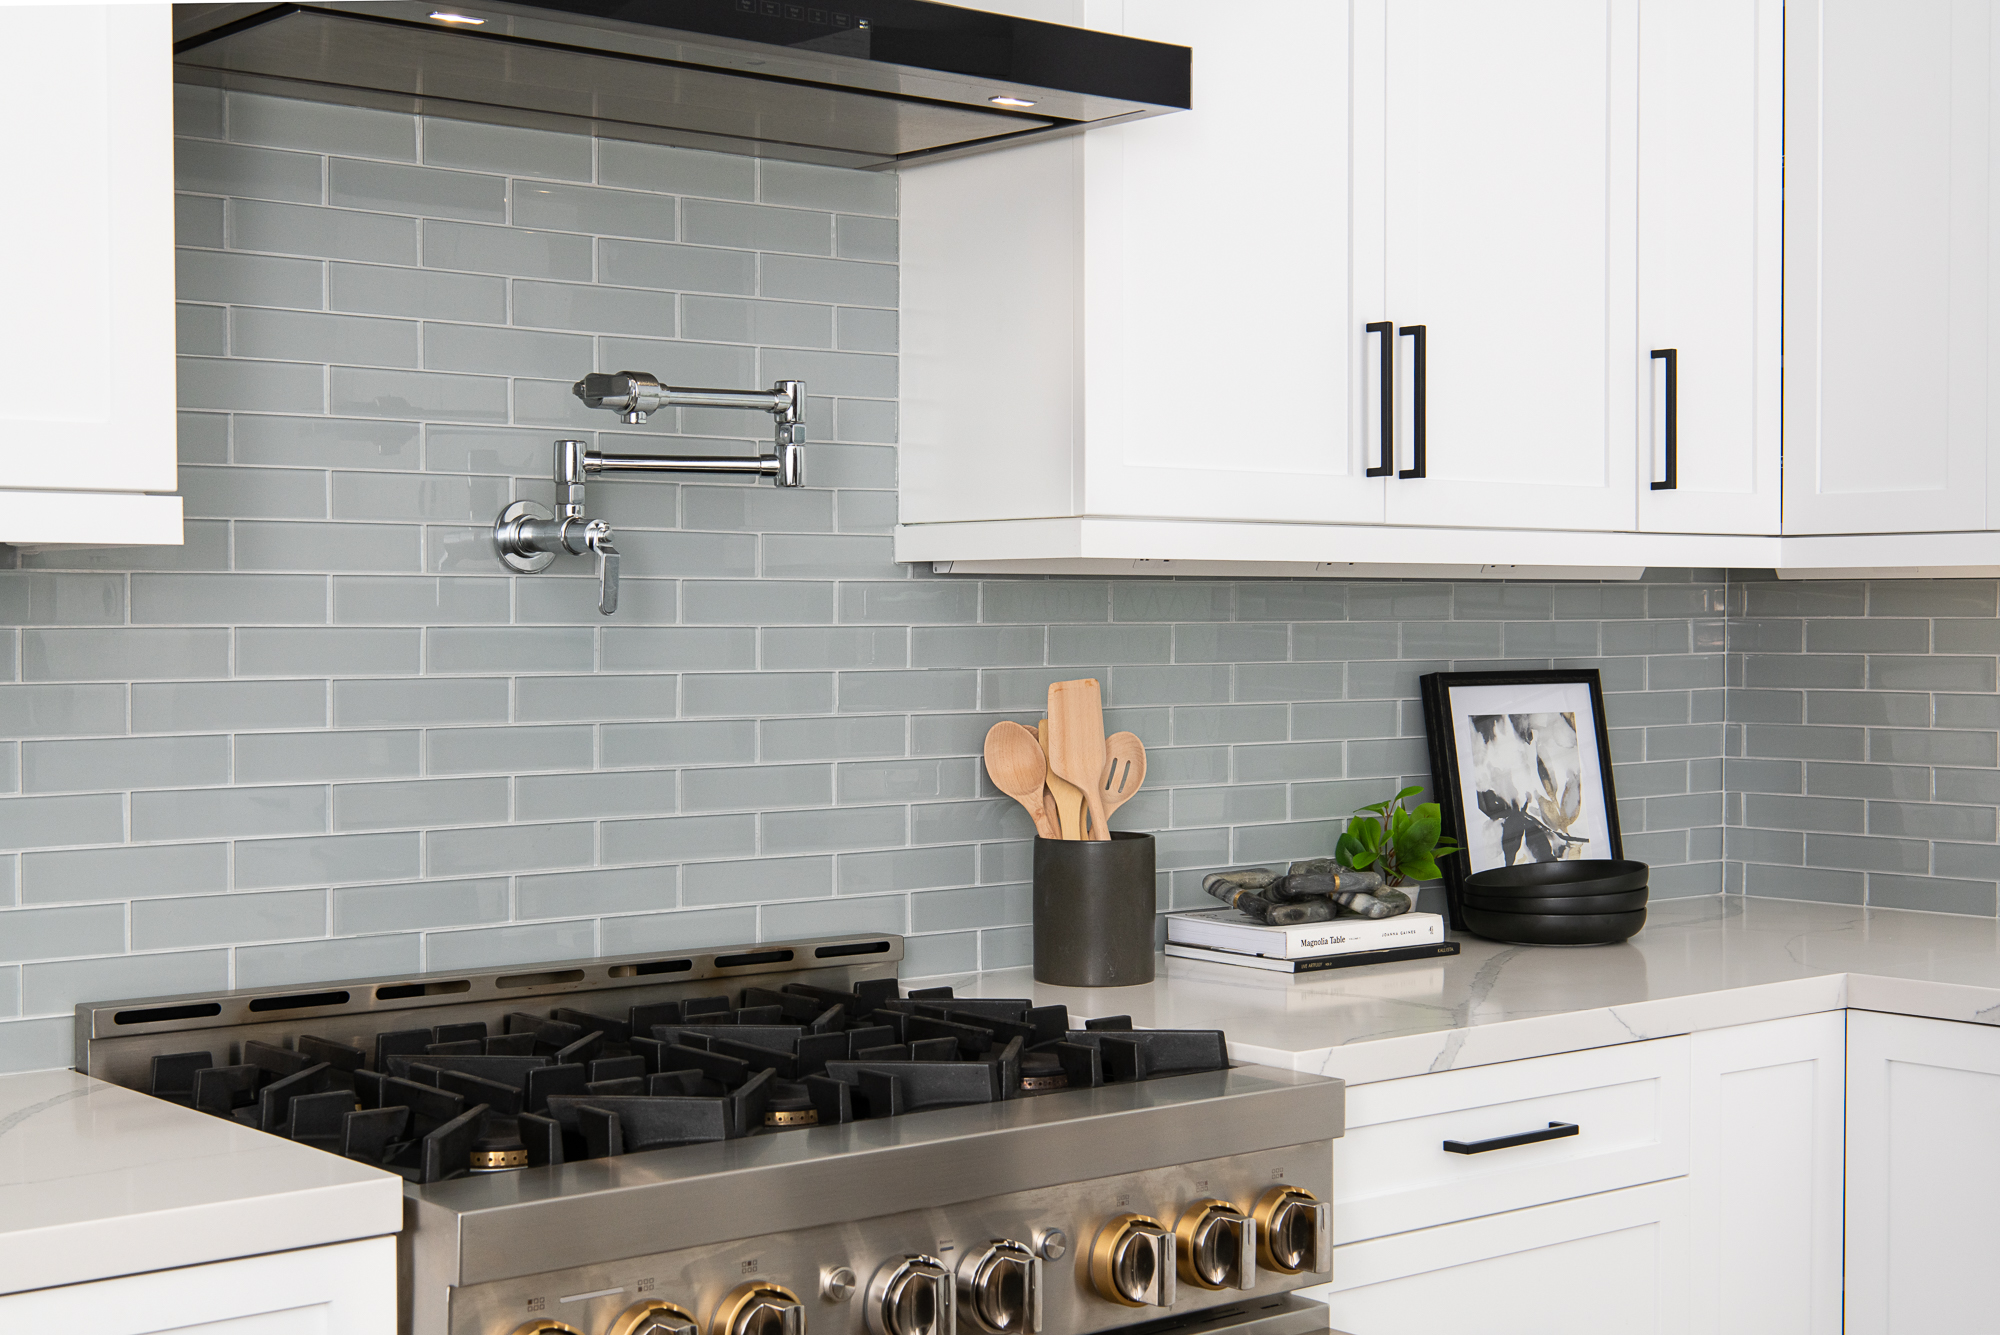 Litze-wall-mounted-pot-filler-with-two-industrial-handle-levers-in-polished-chrome - Save in a Kitchen Remodel